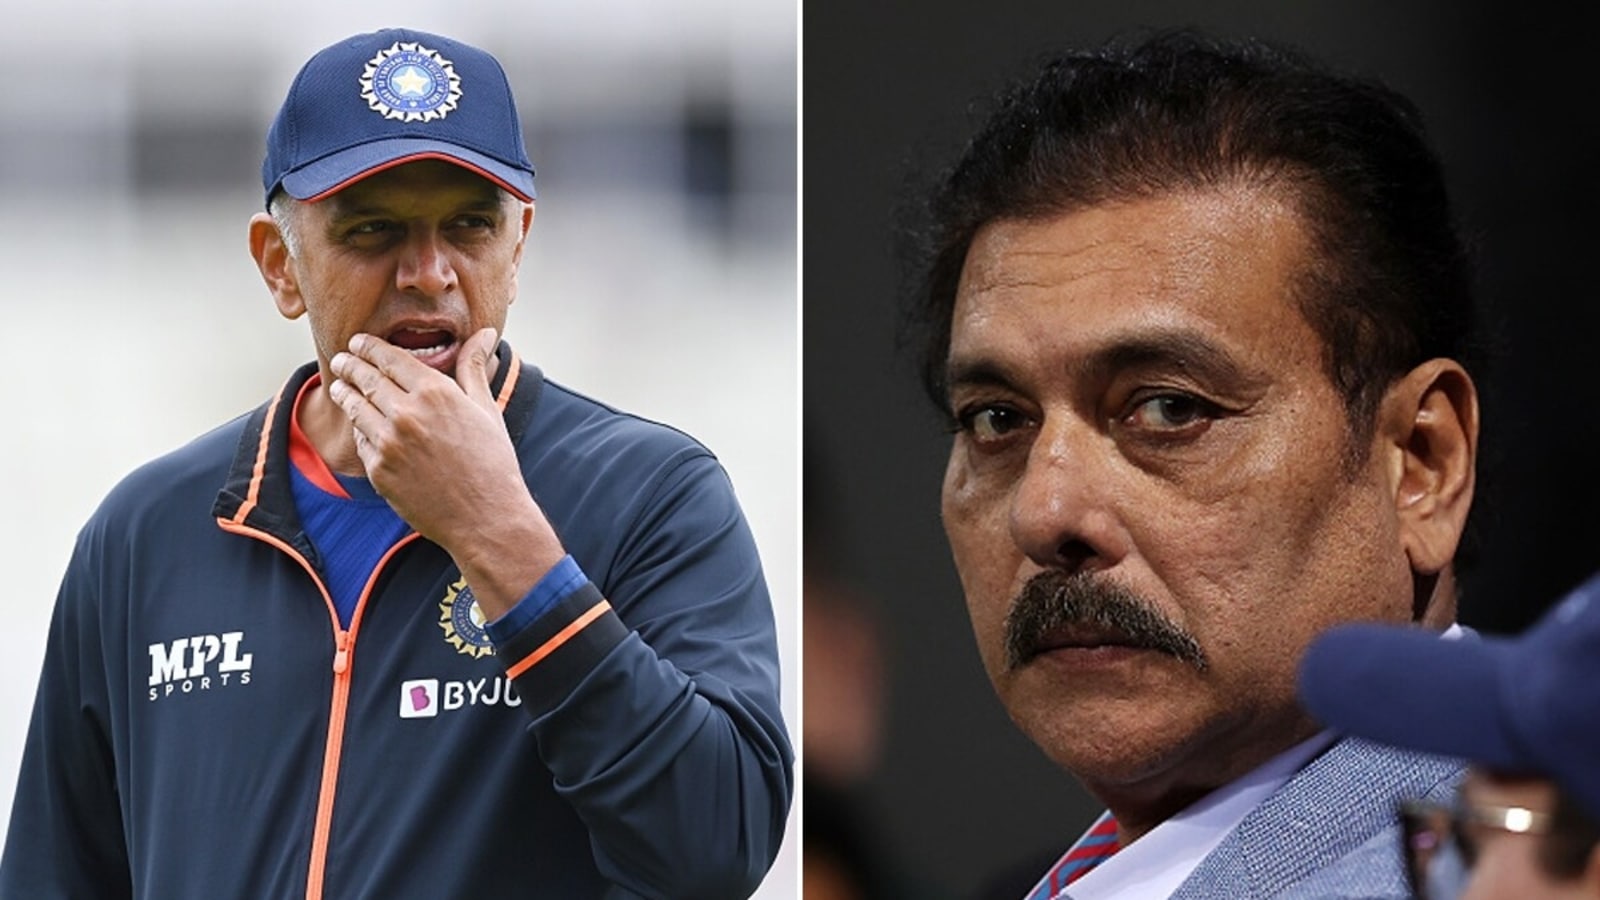 what-do-you-need-these-many-breaks-for-2-3-months-of-ipl-enough-ravi-shastri-against-rahul-dravid-being-granted-rest